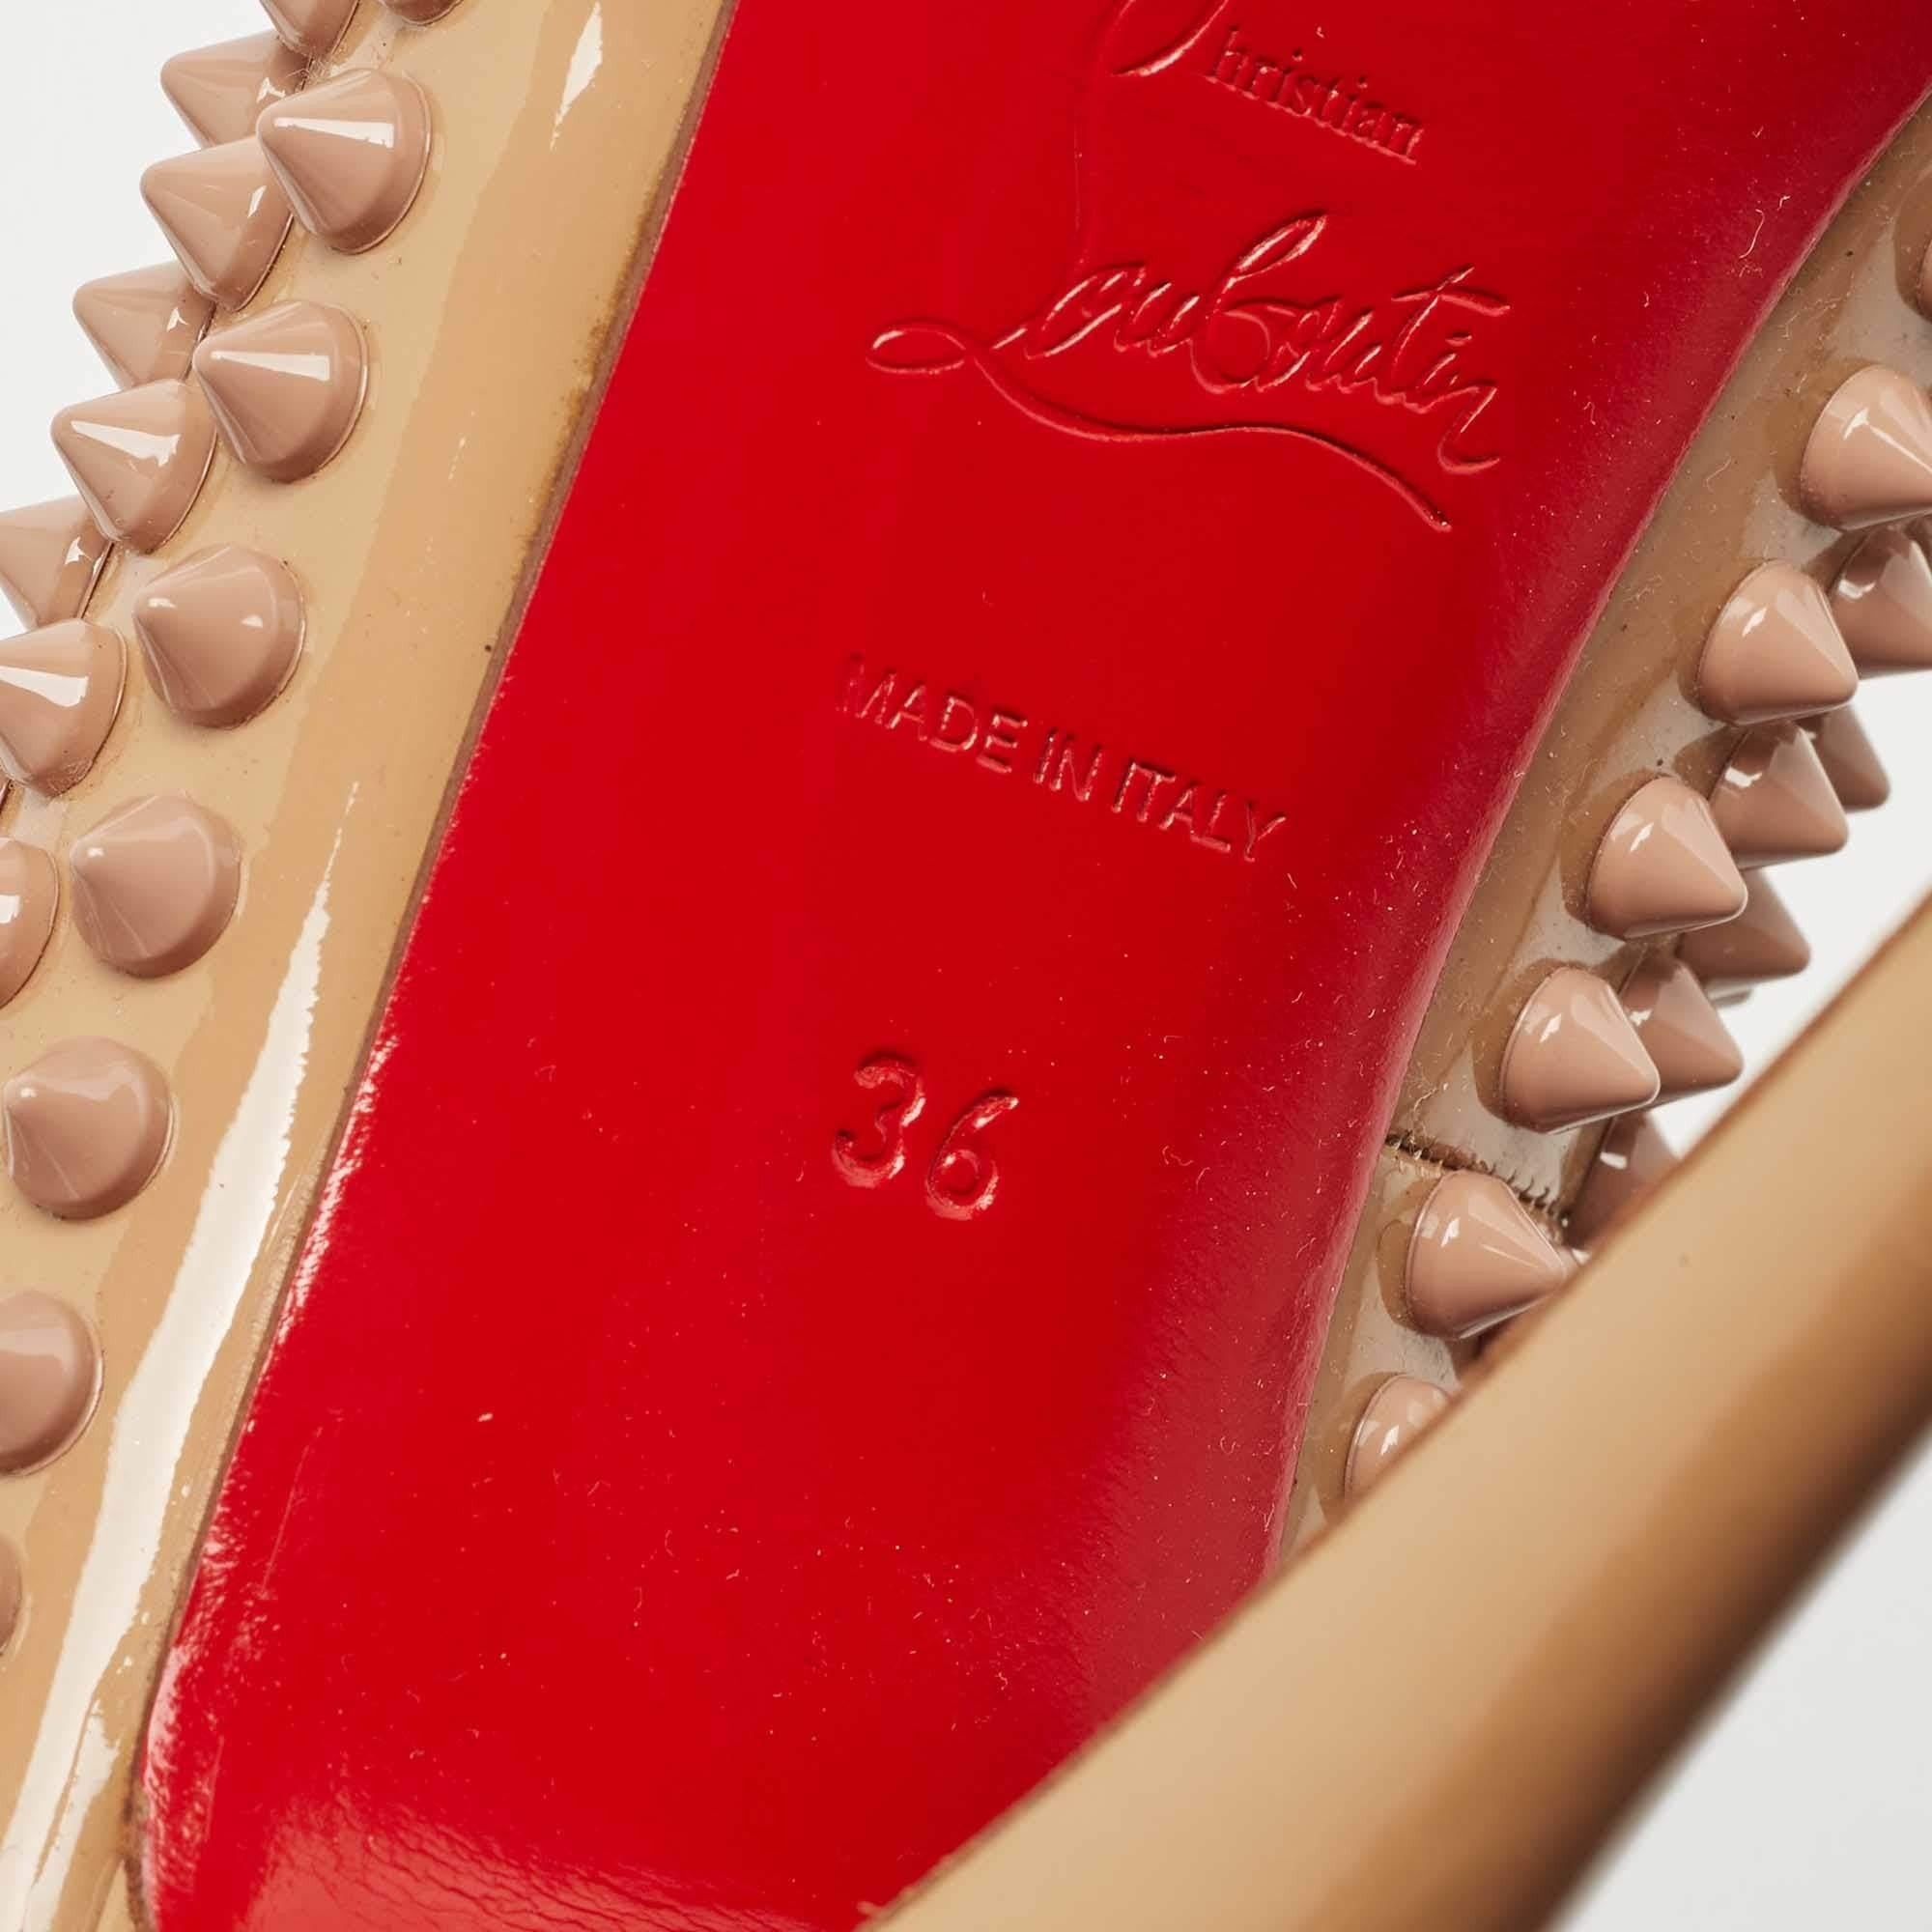 Christian Louboutin Beige Patent Leather Alti Spiked Platform Pumps Size 36 For Sale 4